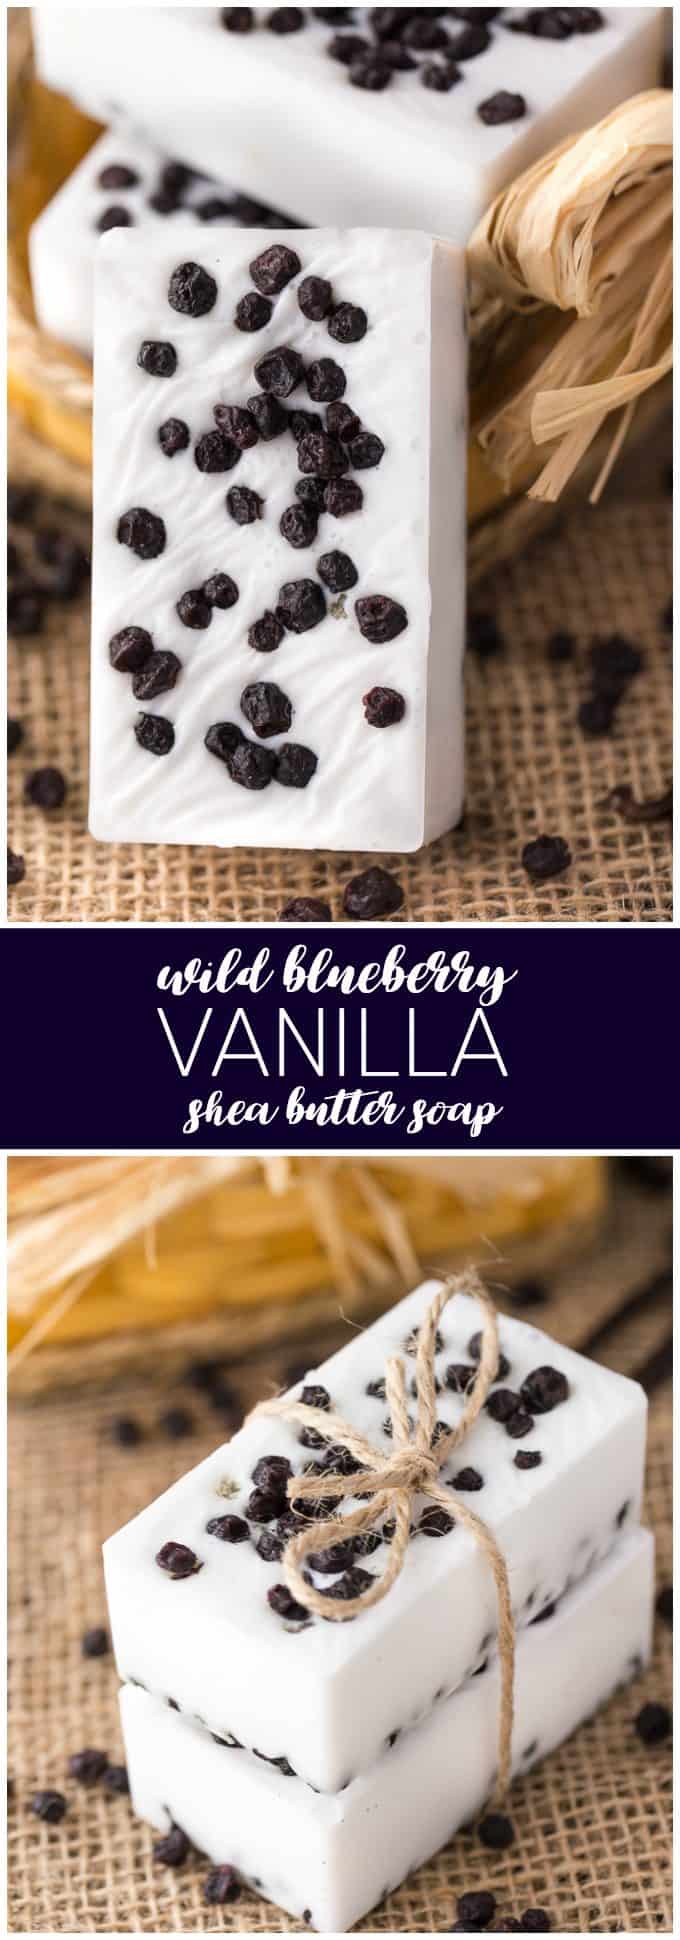 Wild Blueberry Vanilla Shea Butter Soap - Wild blueberries add a beautiful pop of colour to this sweet smelling soap! 